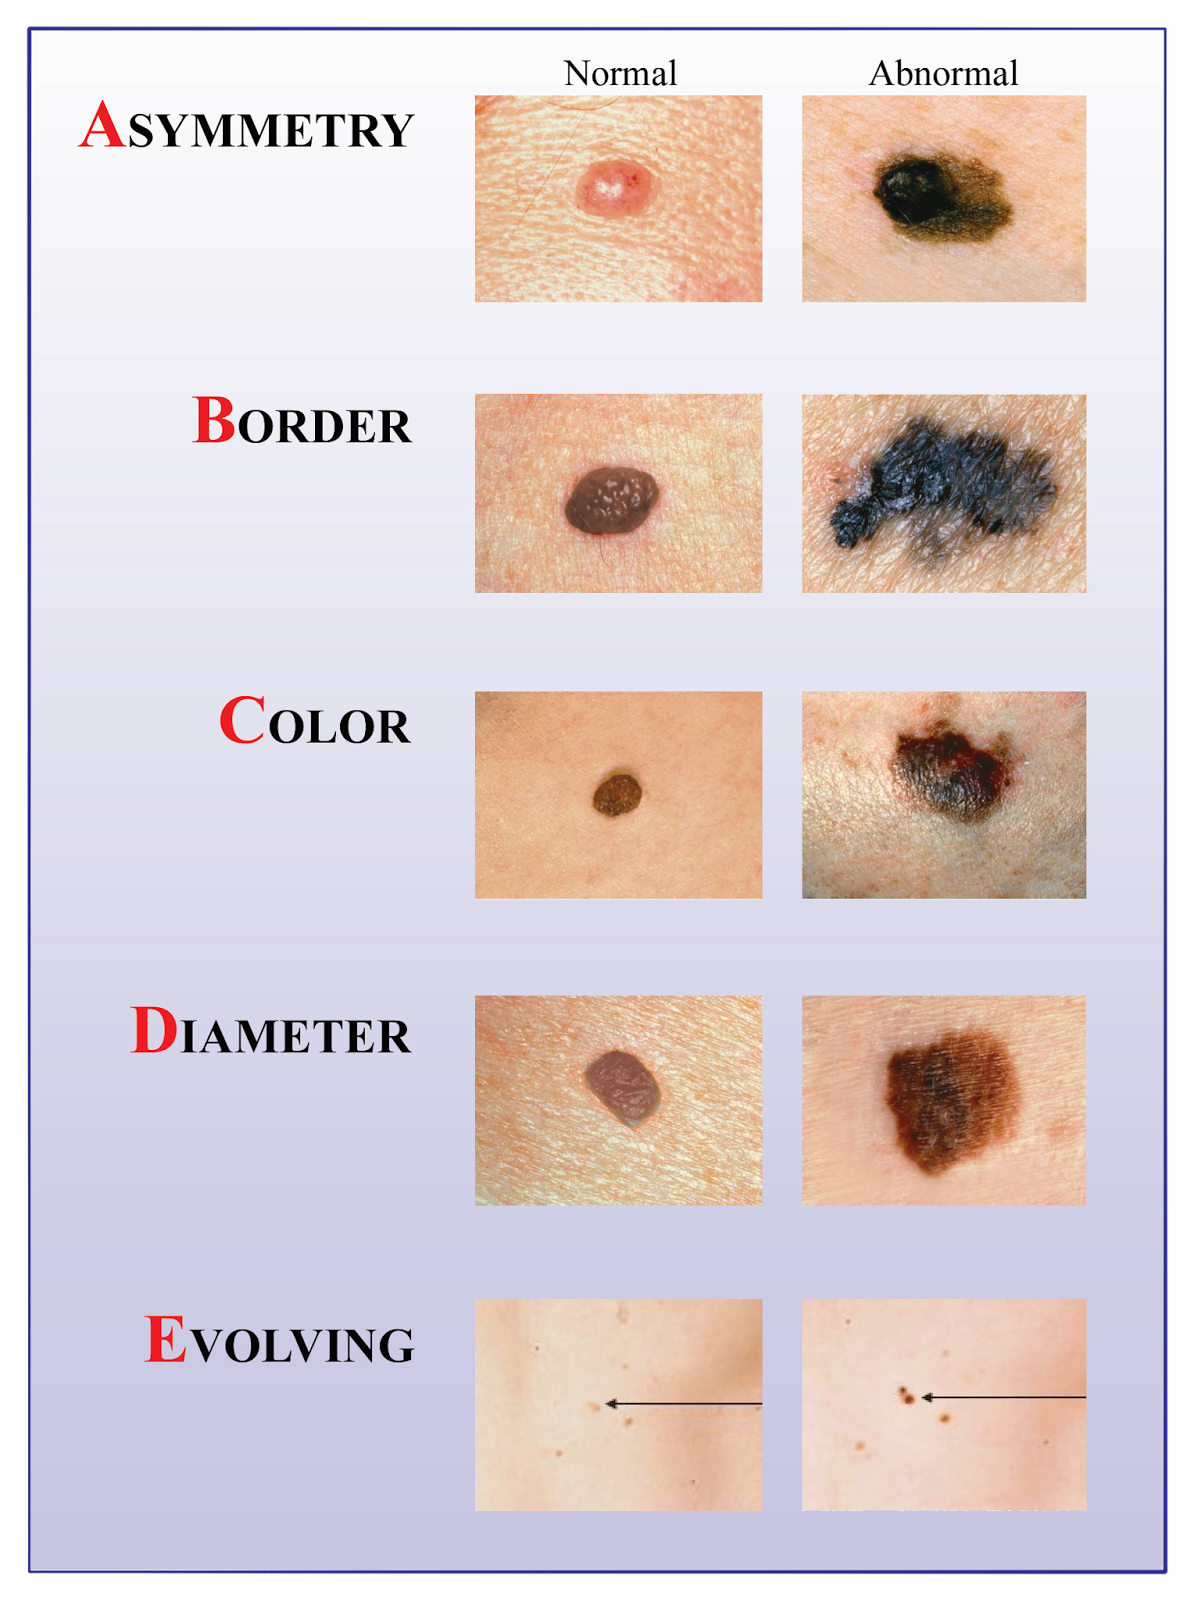 Remember the ABCDEs of Melanoma!